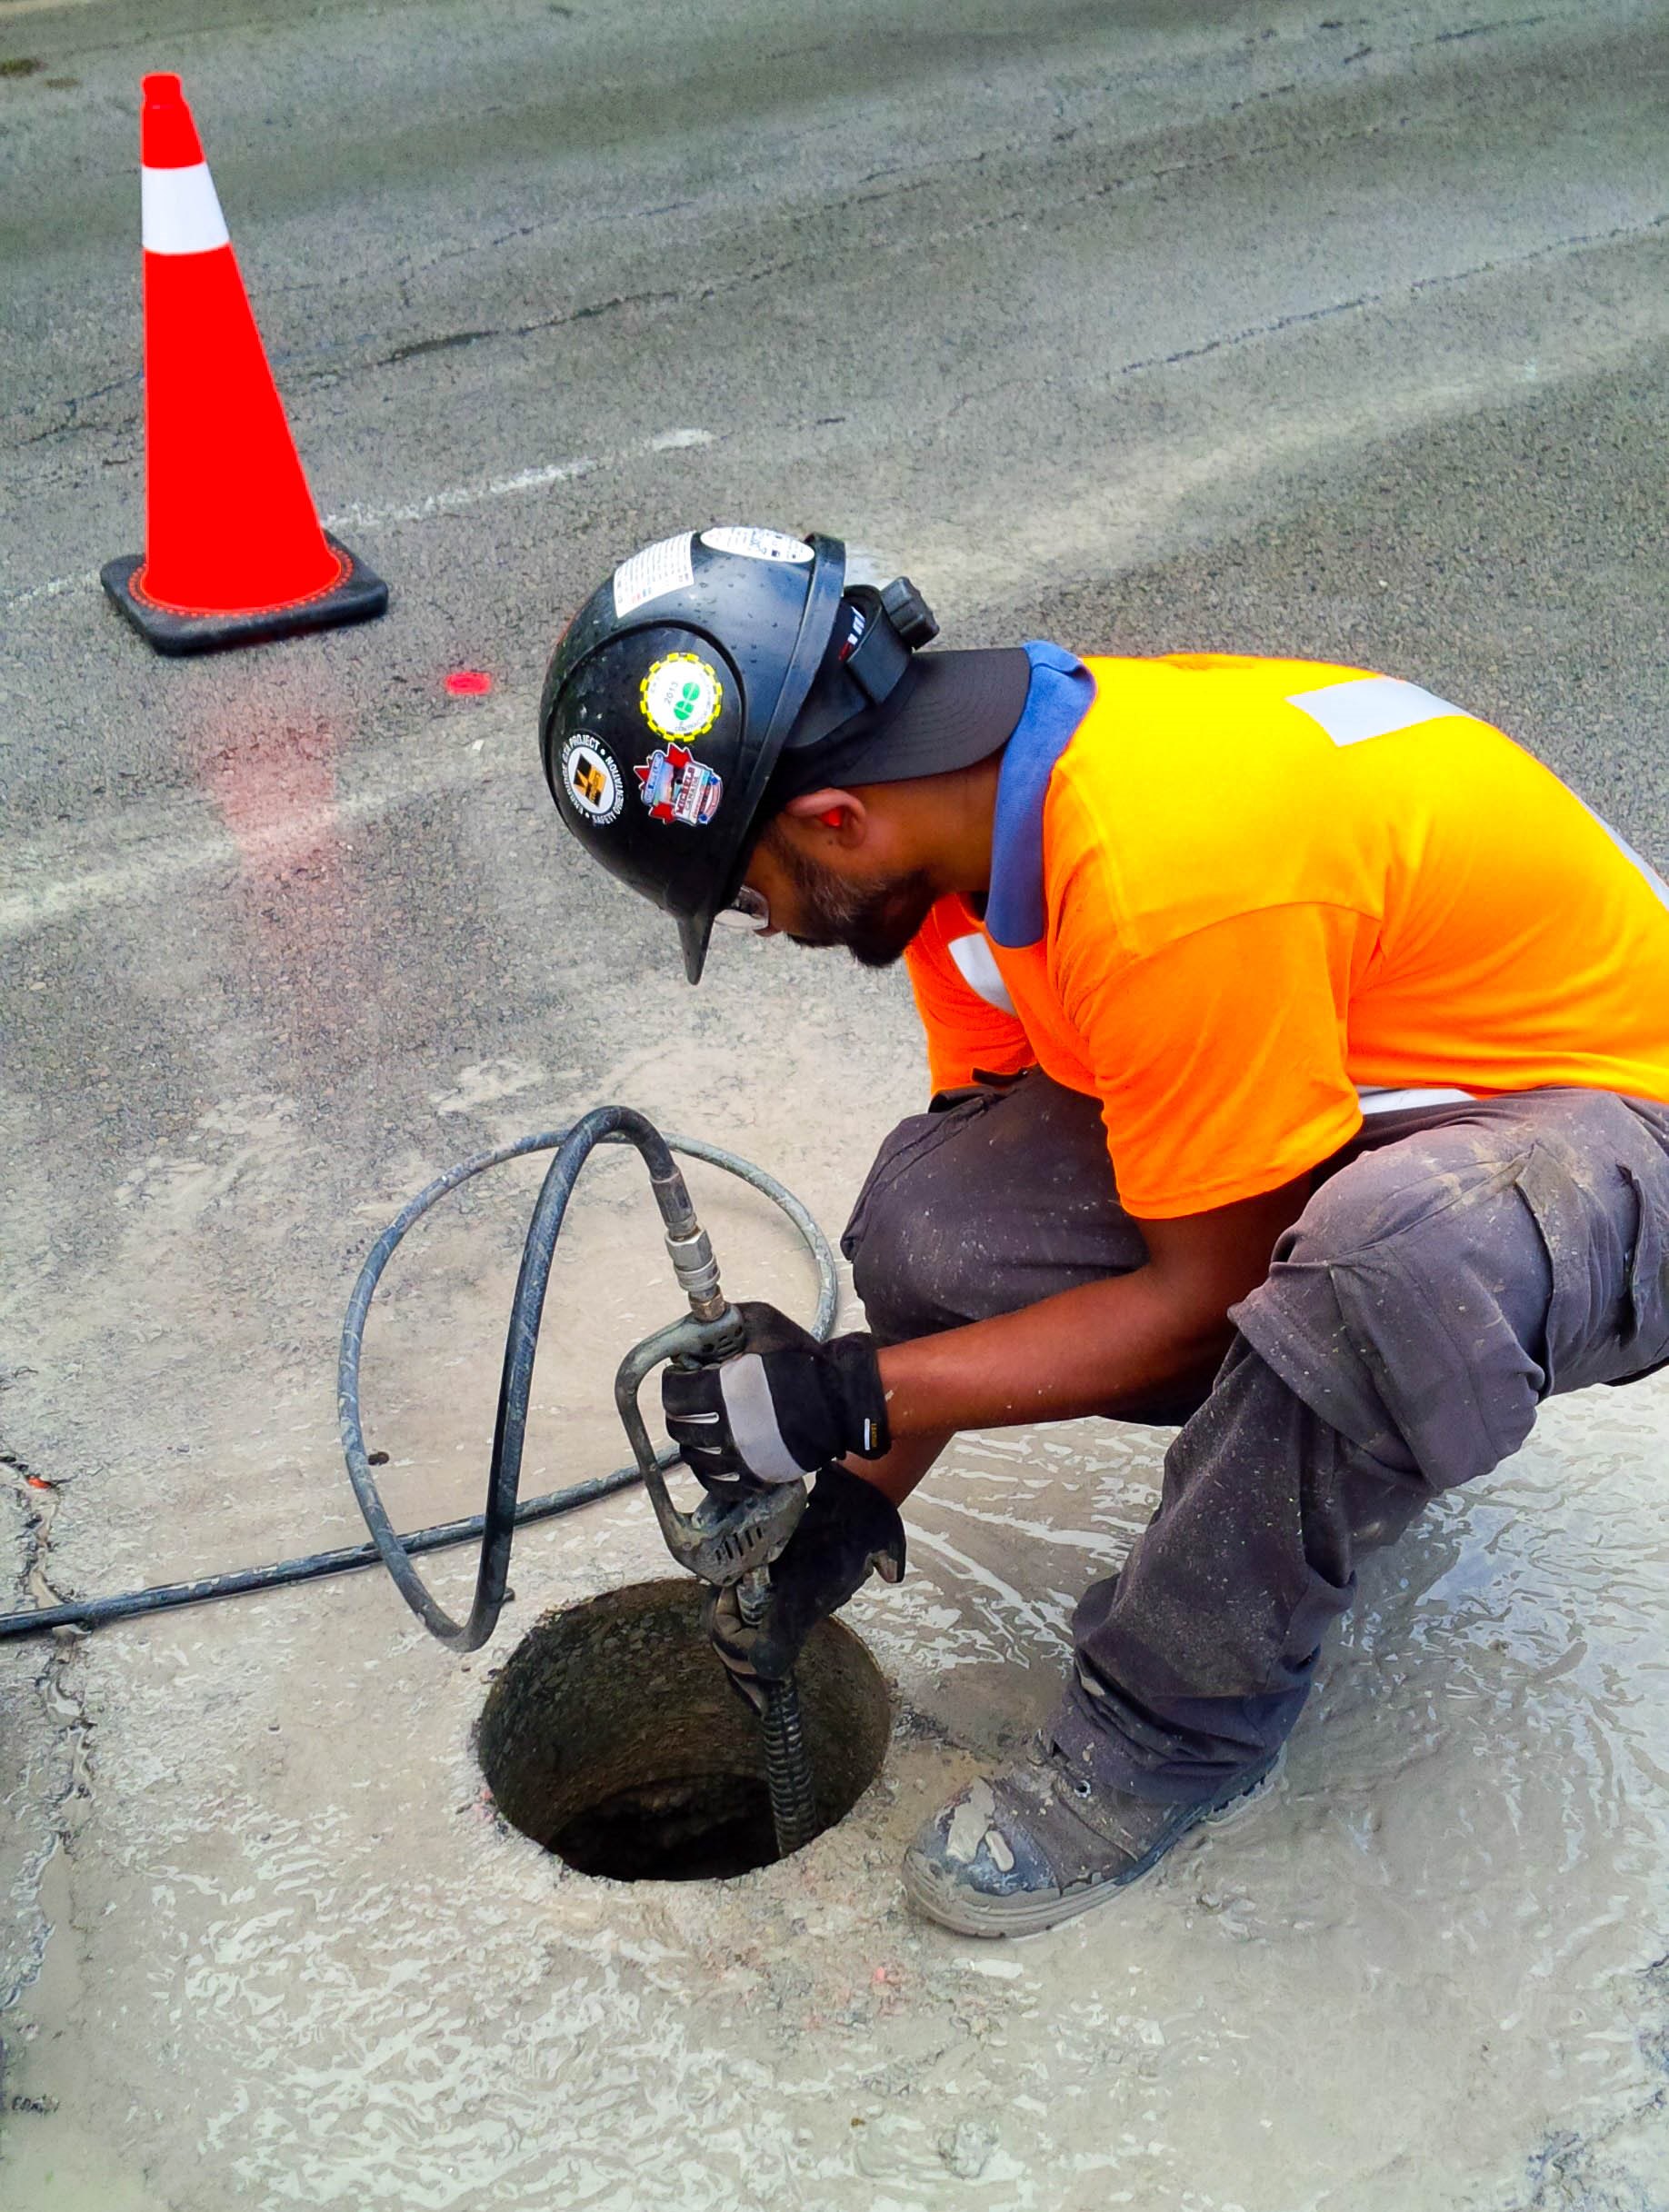 Informative Image displays a multiVIEW field technician kneeled next to a hole in the paved road. The pavement has been recently cored to create an opening (hole). He is bent over using a high pressure water jet to loosen the material covering the target, which is typical of a Hydro Excavation.